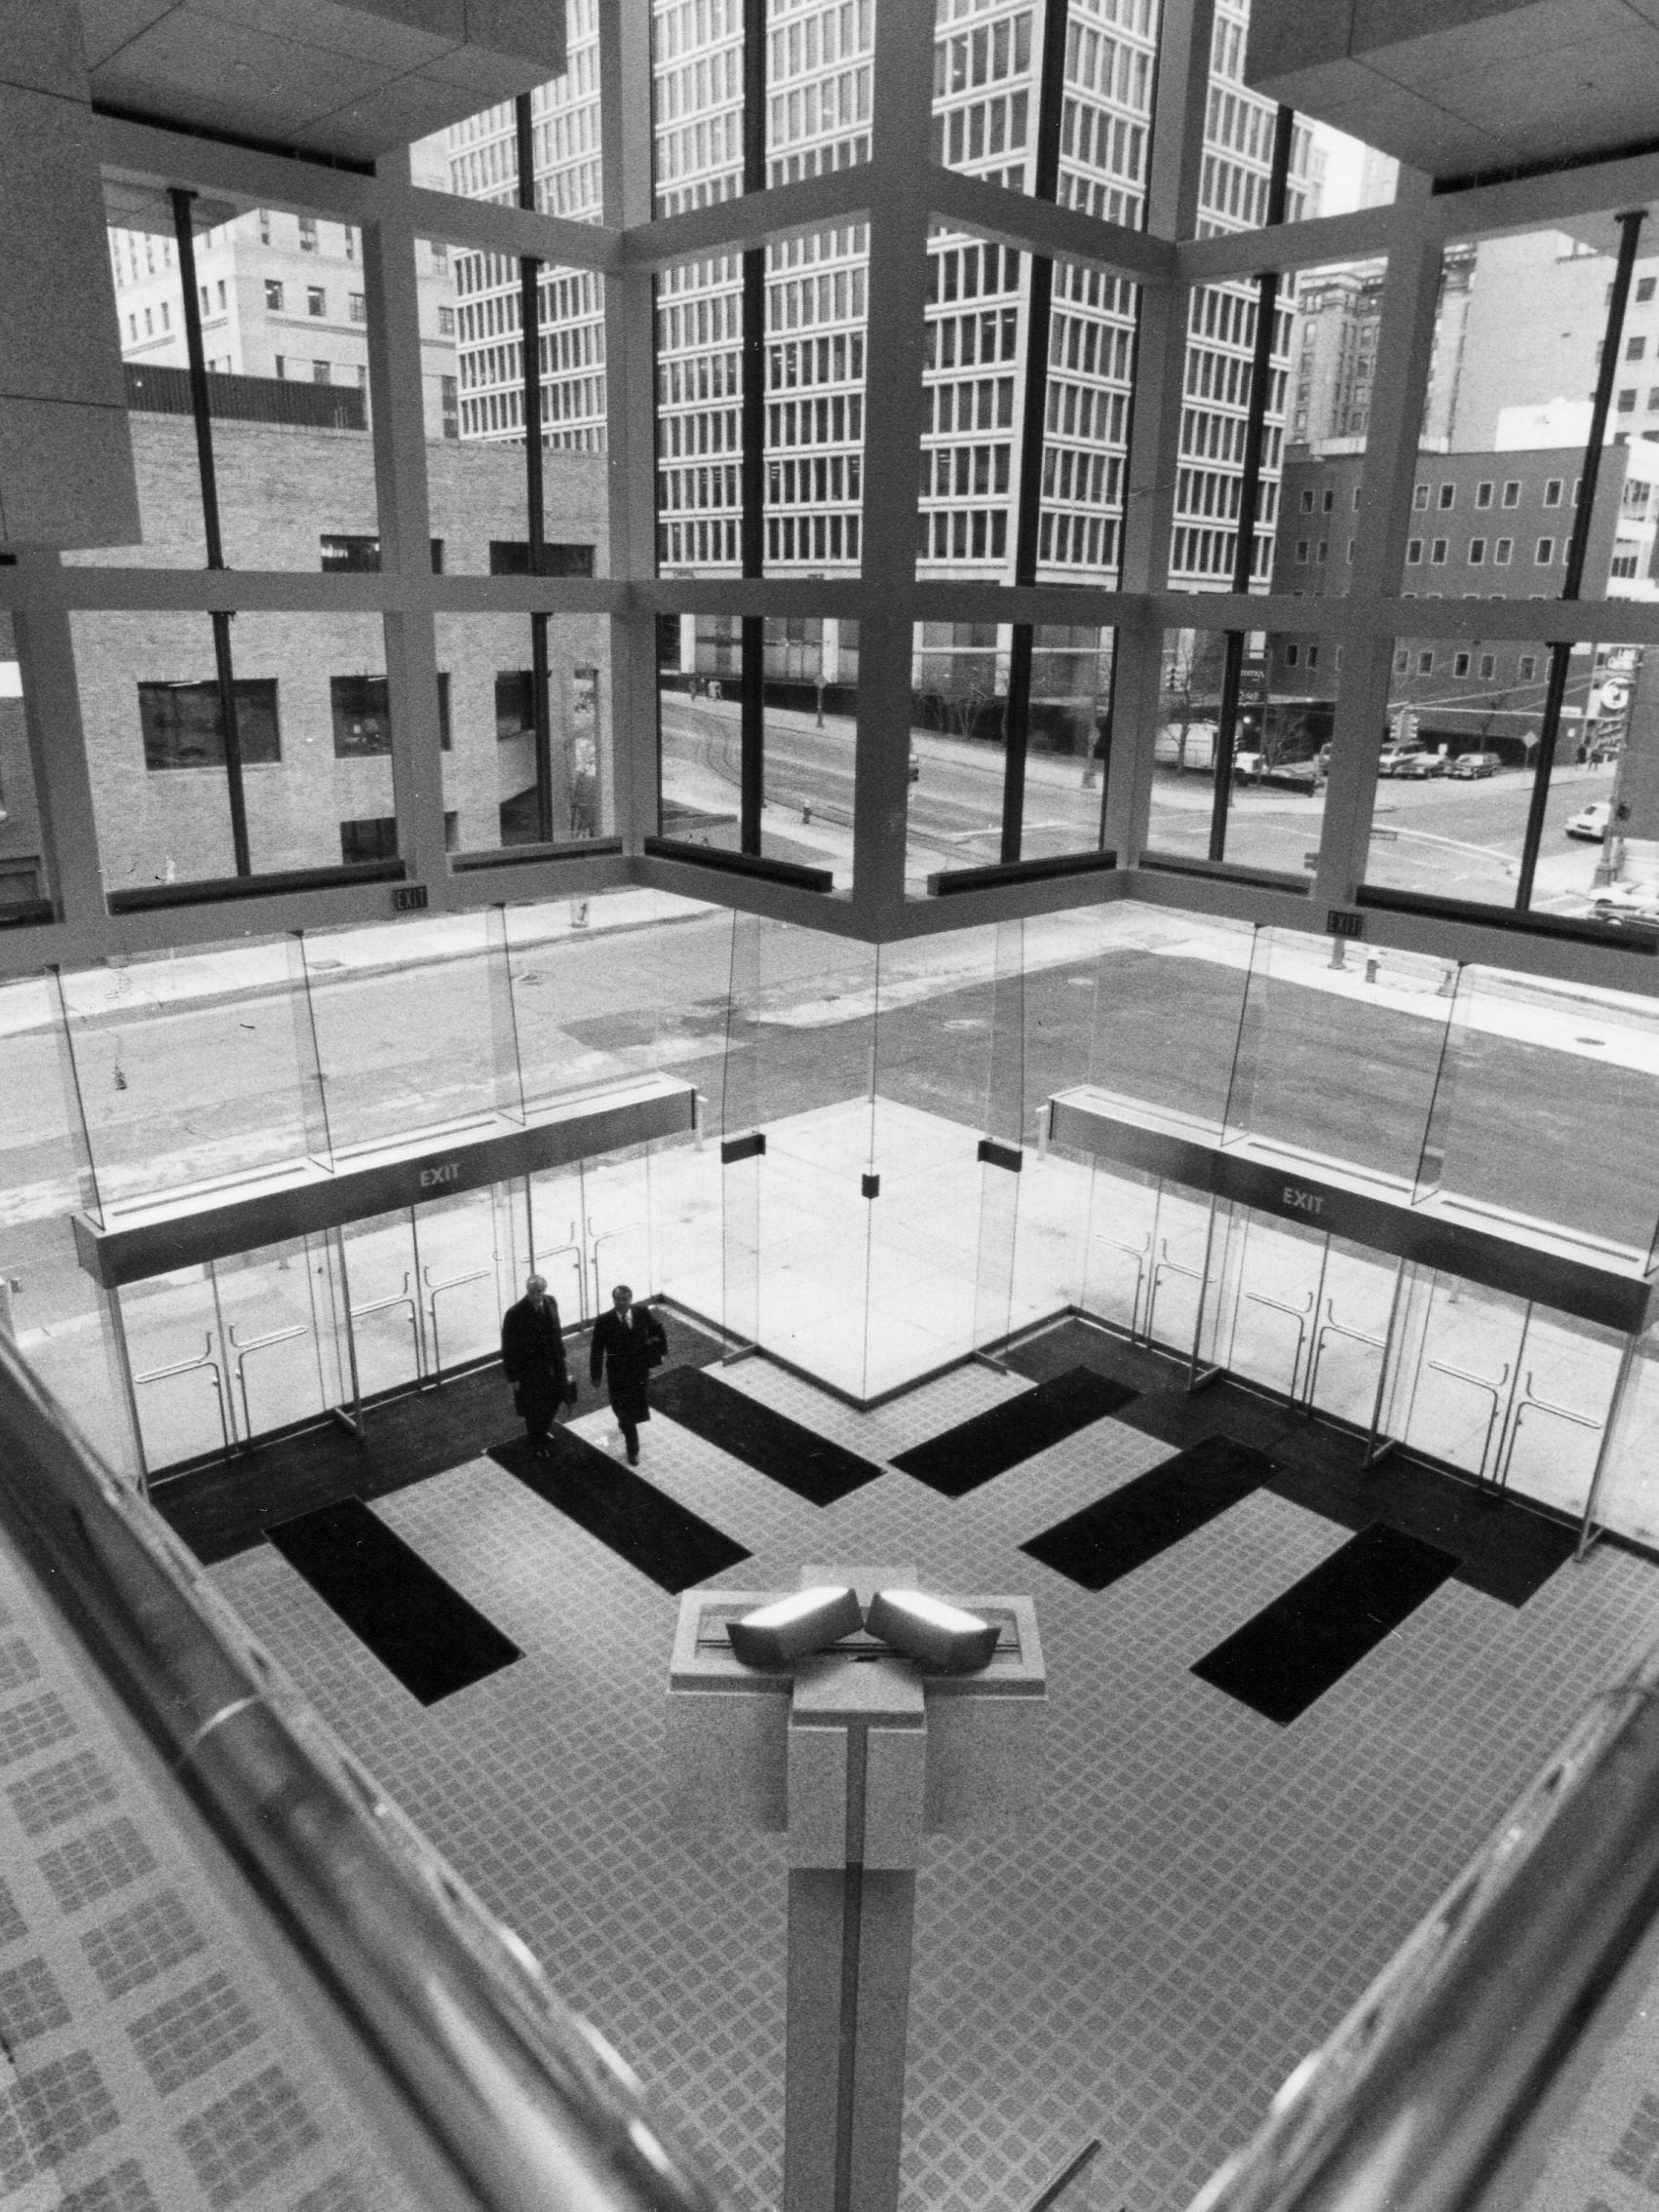 The interior of the newly renovated Cobo Center, Jan. 27, 1989.